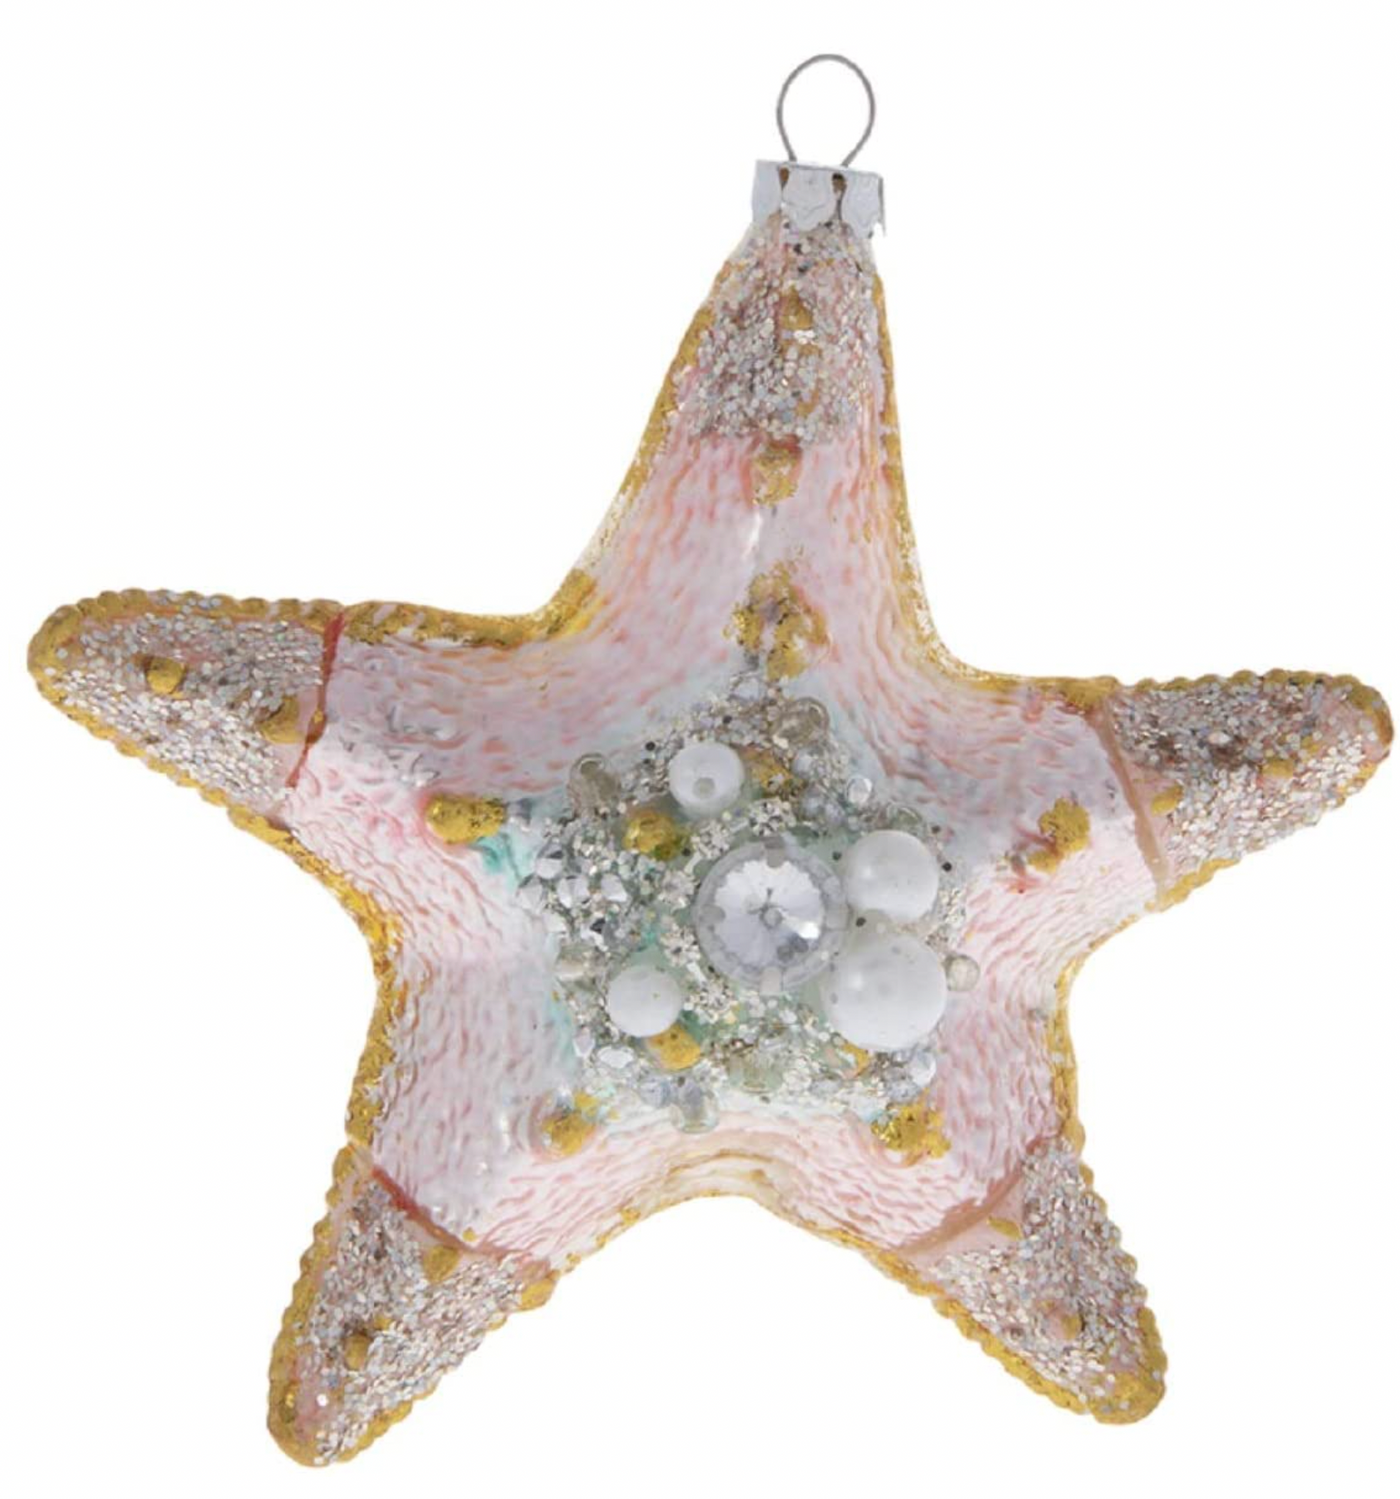 Robert Stanley 2021 Glitzy Starfish Glass Christmas Ornament New with Tag